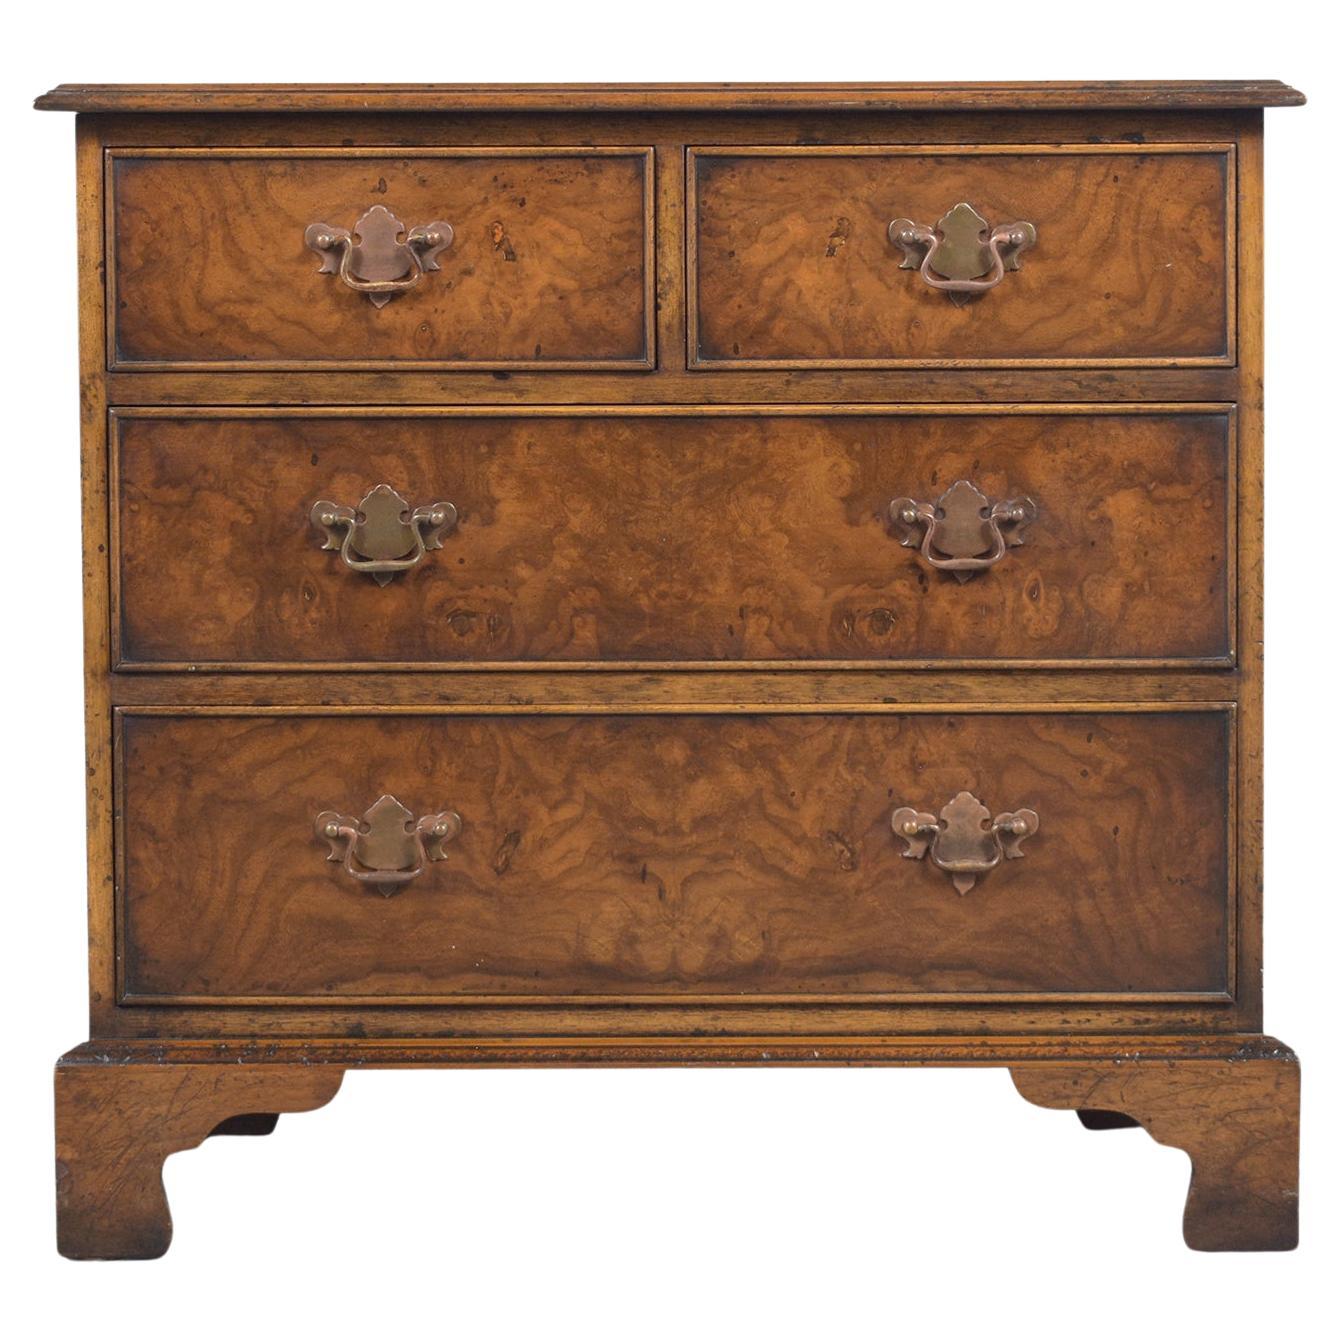 Restored Early 1950s Burled Veneers Chest of Drawers: A Vintage Patina Finish For Sale